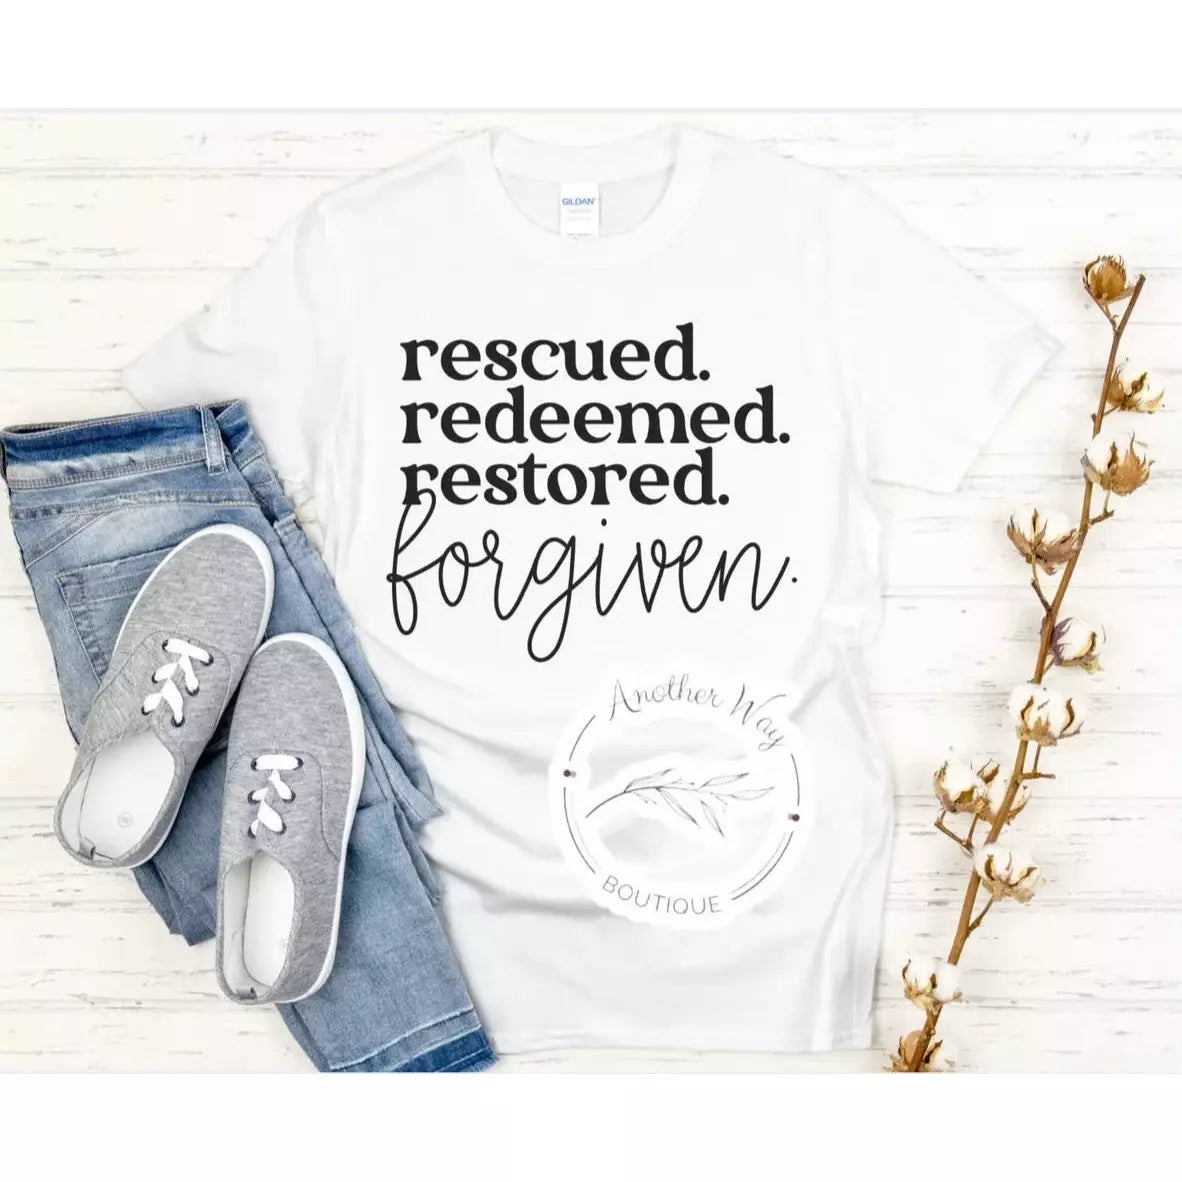 "Rescued. Redeemed. Restored. Forgiven." - Another Way Boutique